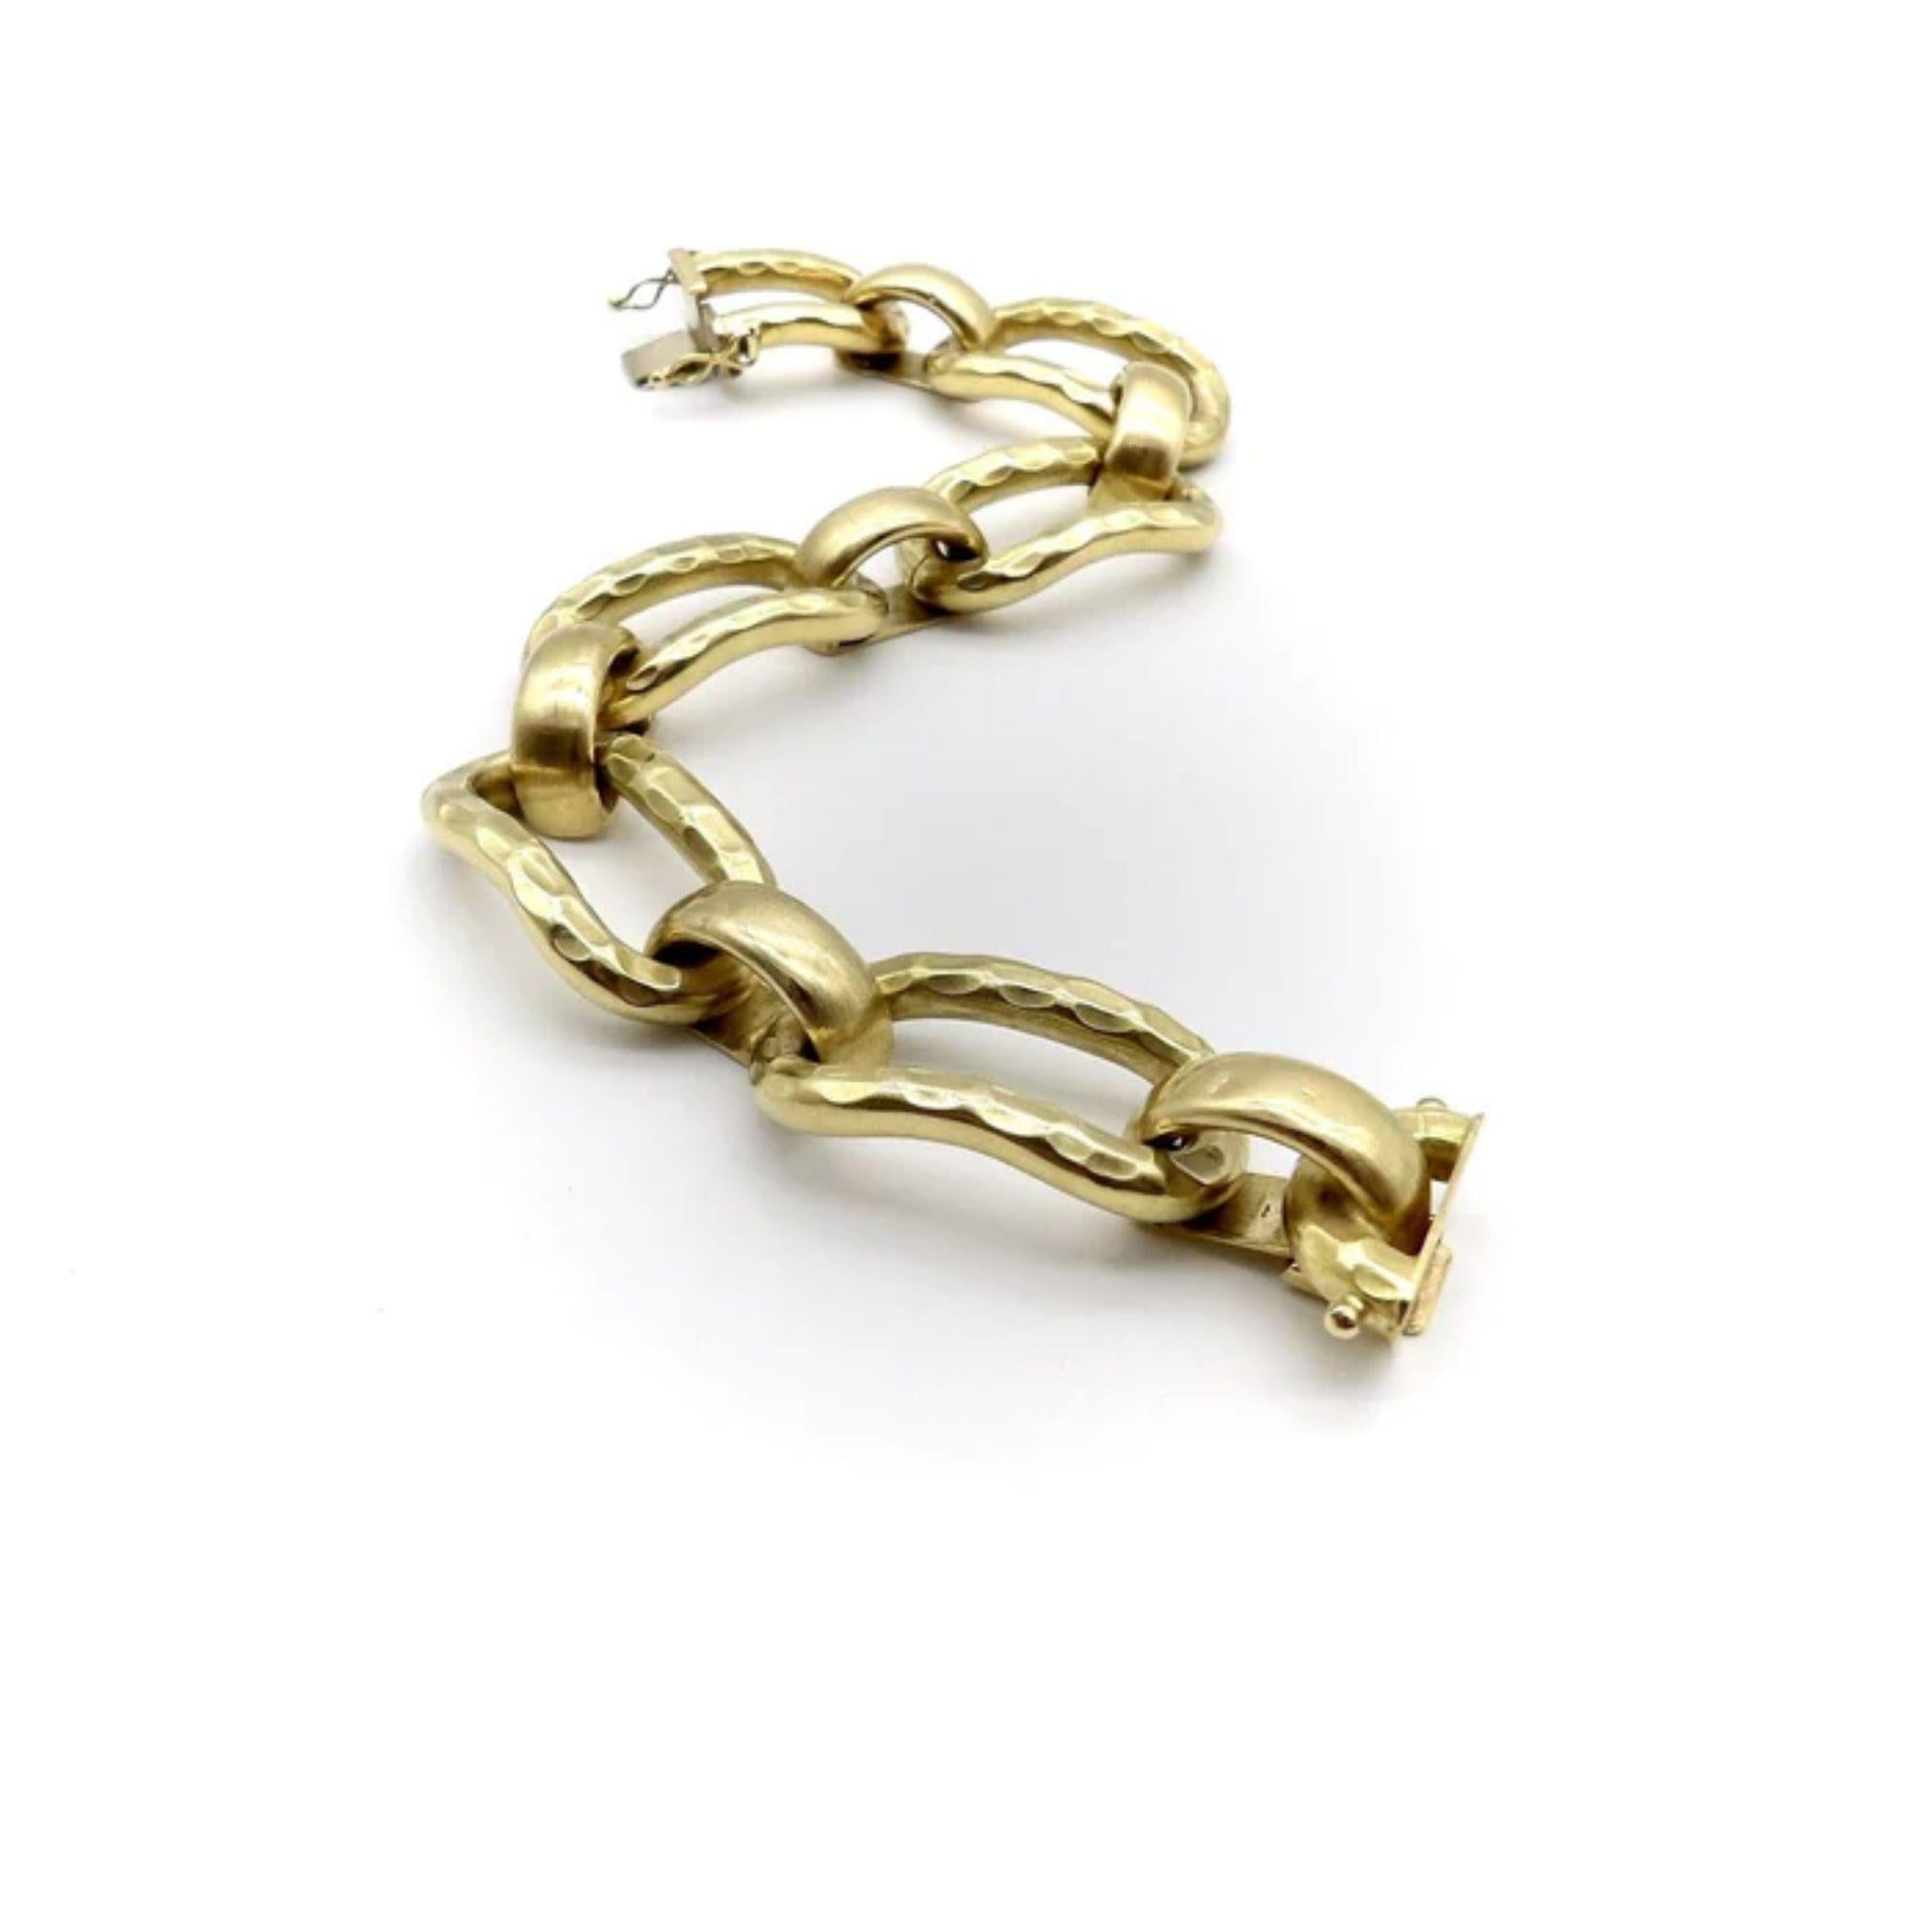 Circa 1970, this 18k vintage bracelet consists of alternating links that create a great, bold look. The bracelet’s pattern alternates between elongated links that are visually textured to emulate a hand-hammered surface, and shorter half-dome links